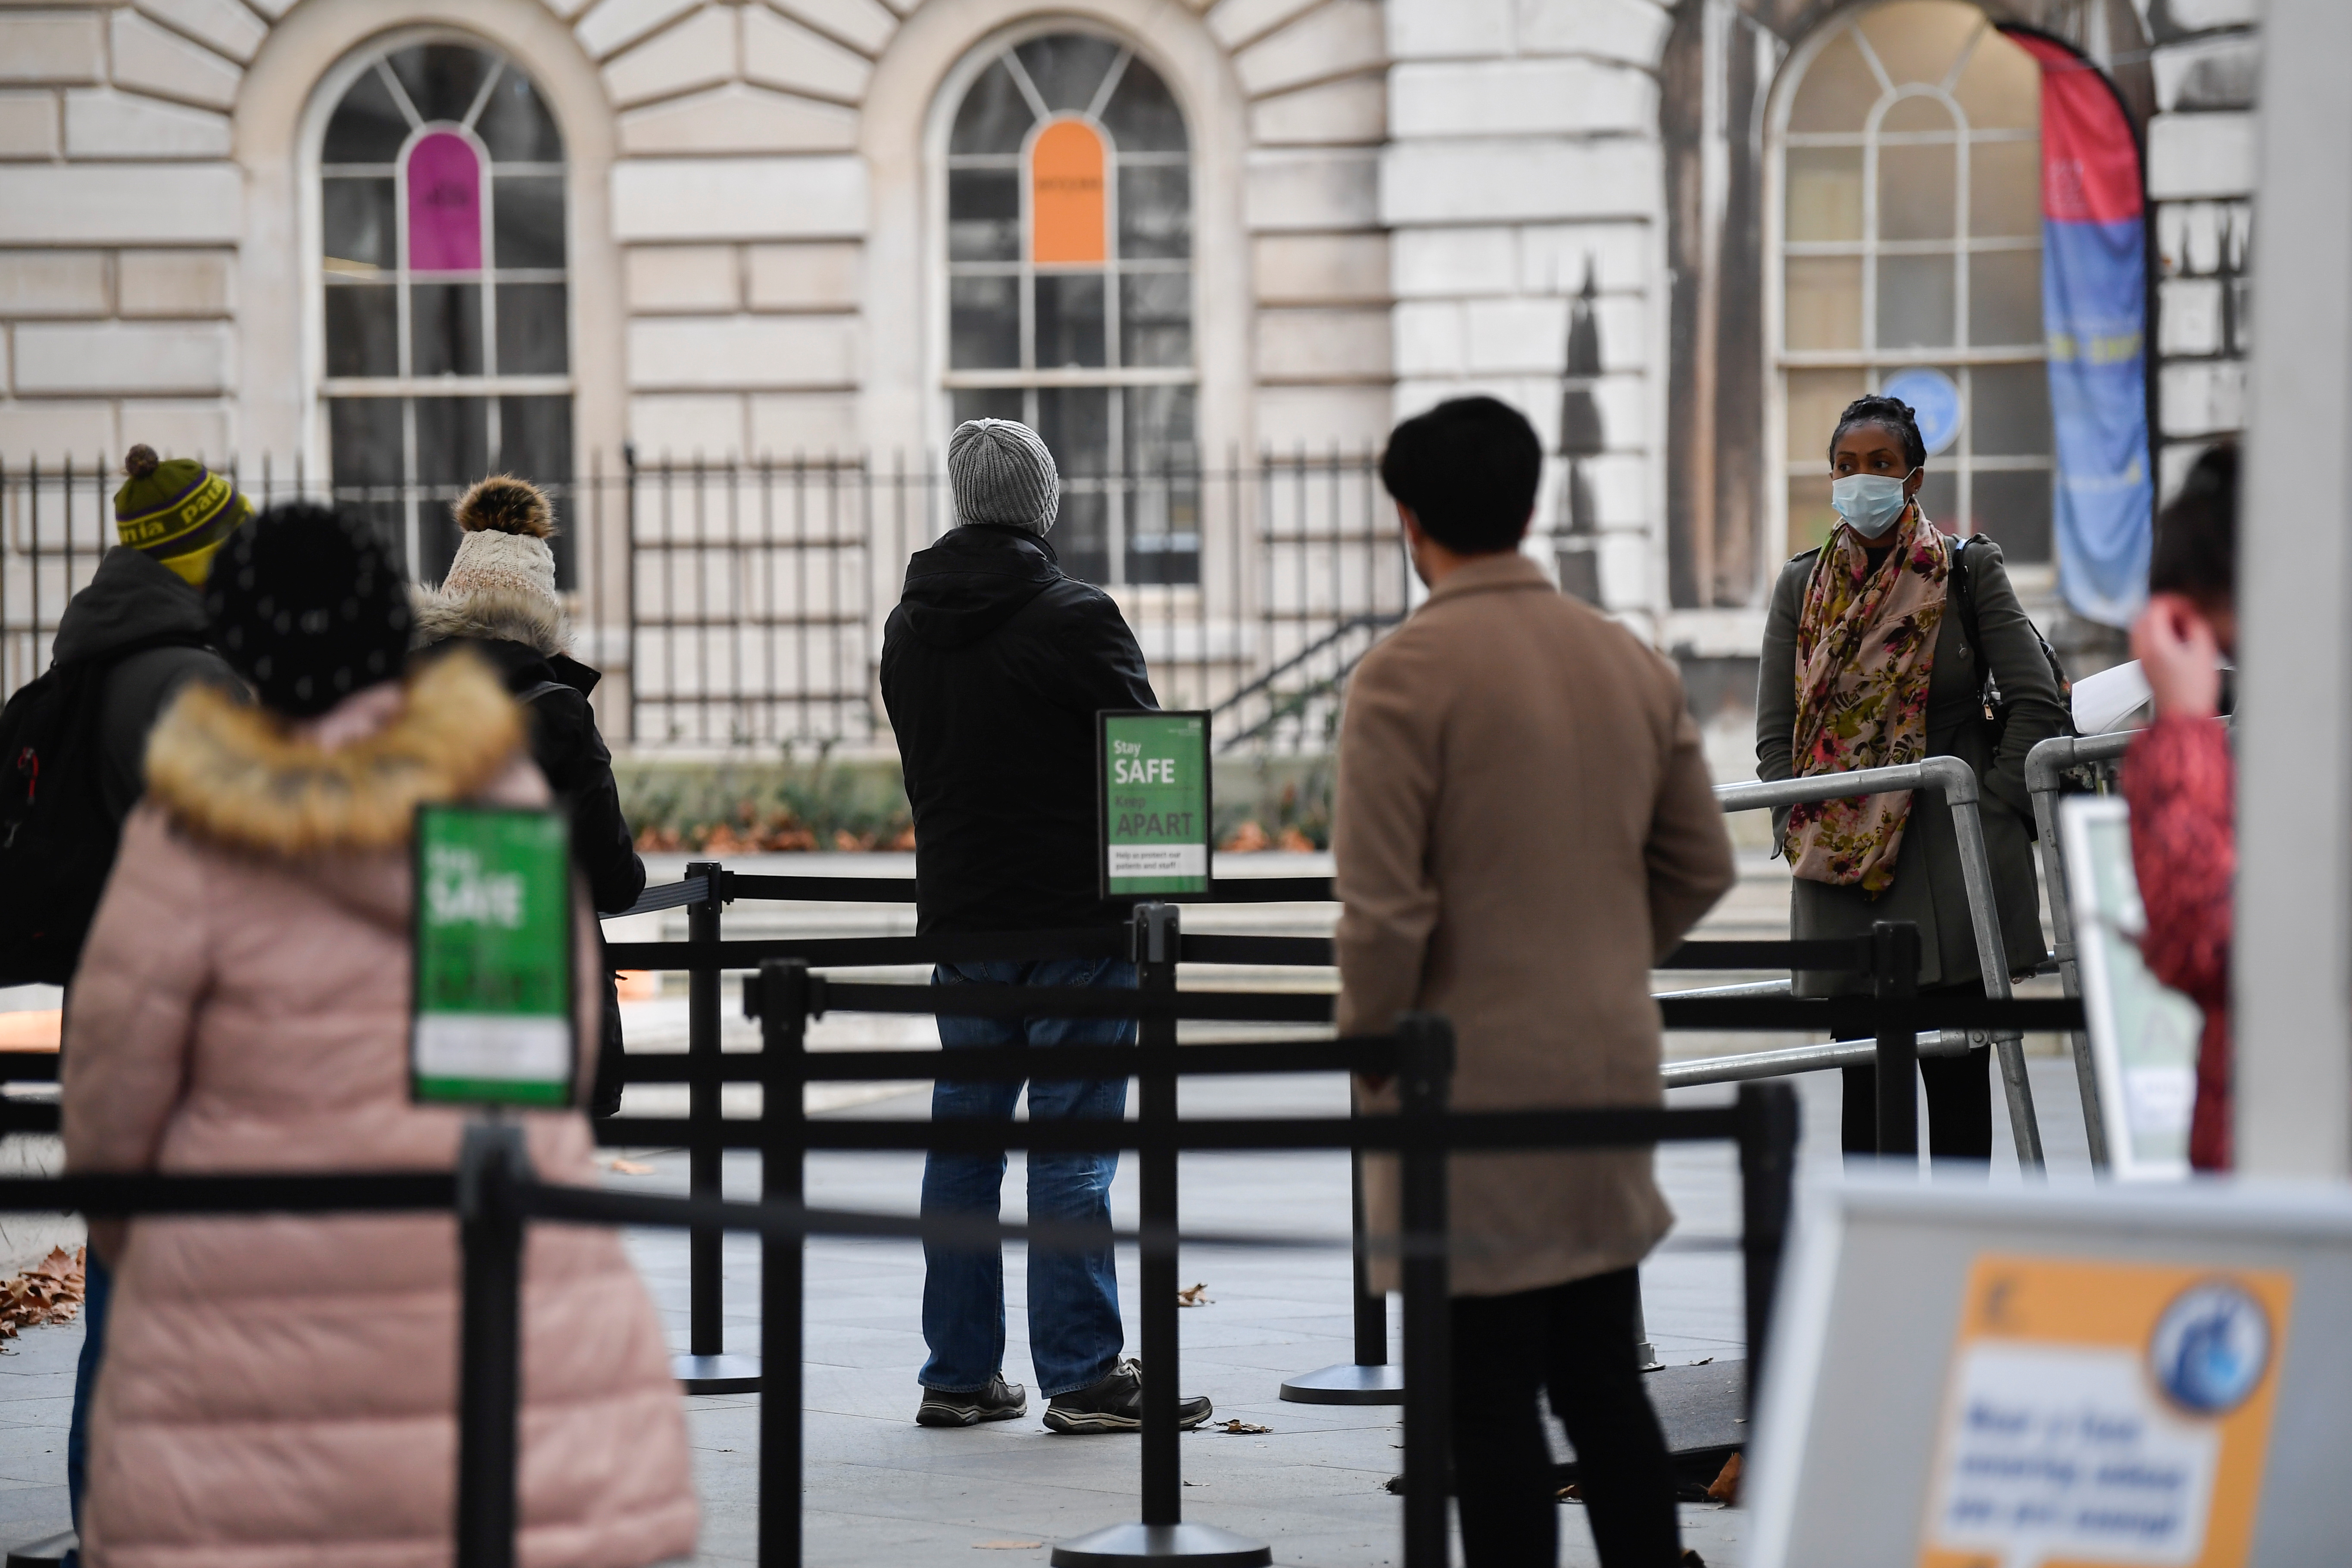 People queue as they wait to receive a COVID-19 vaccine at London Bridge vaccination centre, amidst the spread of the coronavirus disease (COVID-19), in London